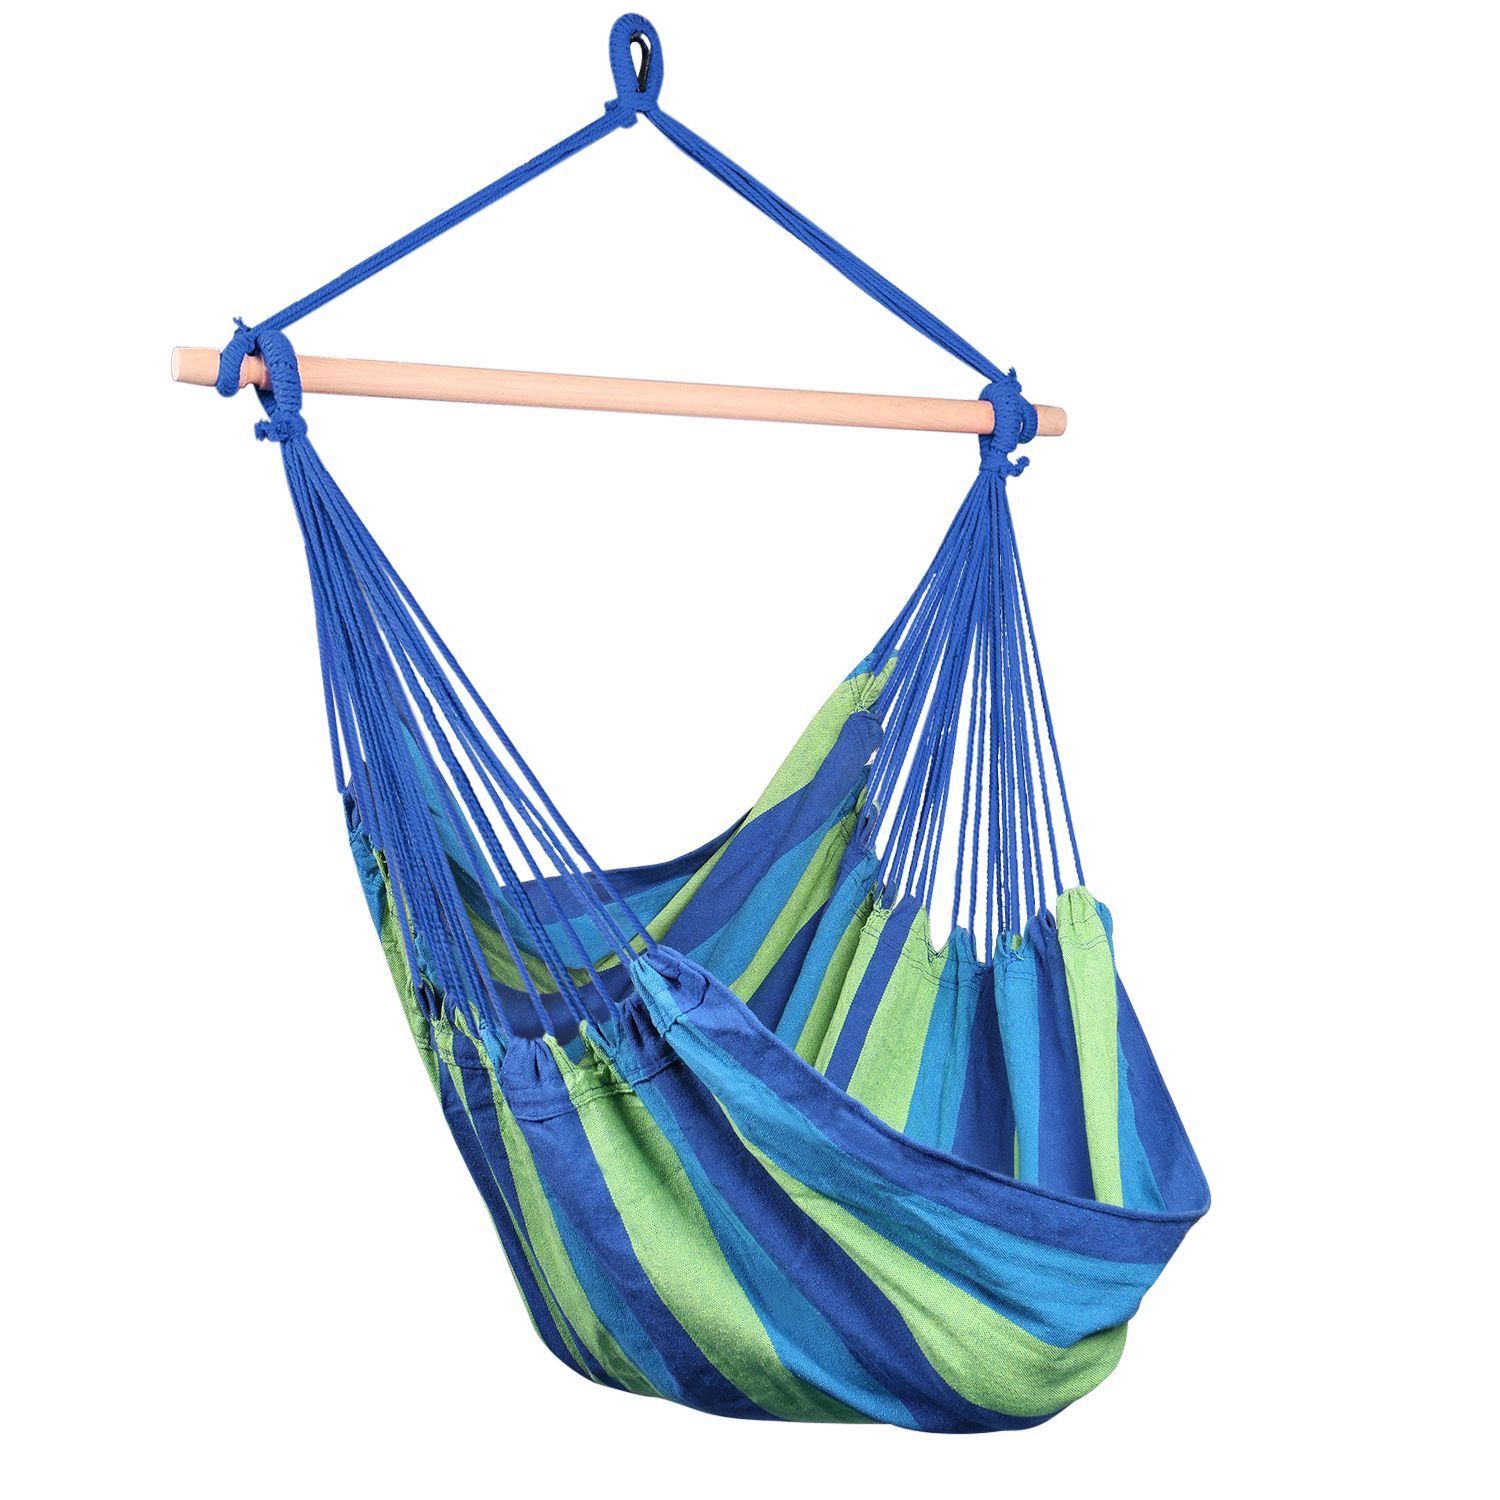 Details About Brazilian Hammock Chair, Cotton Weave Porch Swing W/ Spreader  Bar, Jungle Blue Regarding Most Current Cotton Porch Swings (View 1 of 25)